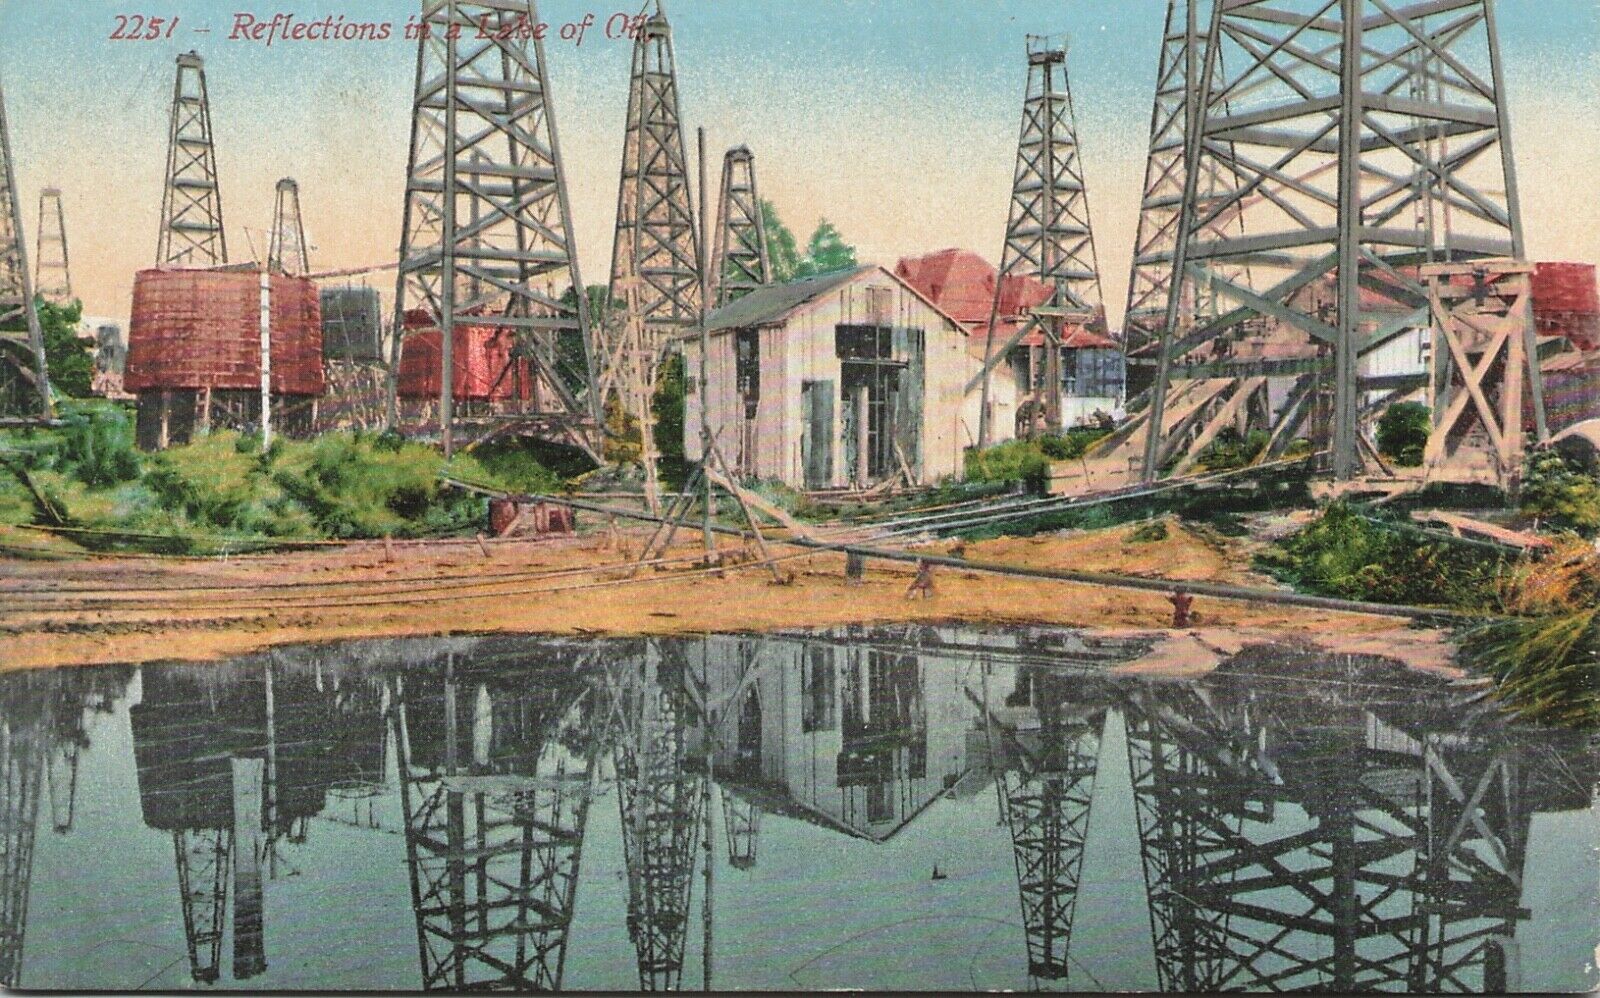 Oil Rig Reflections In A Lake Of Oil 1910s Industrial Pollution Postcard